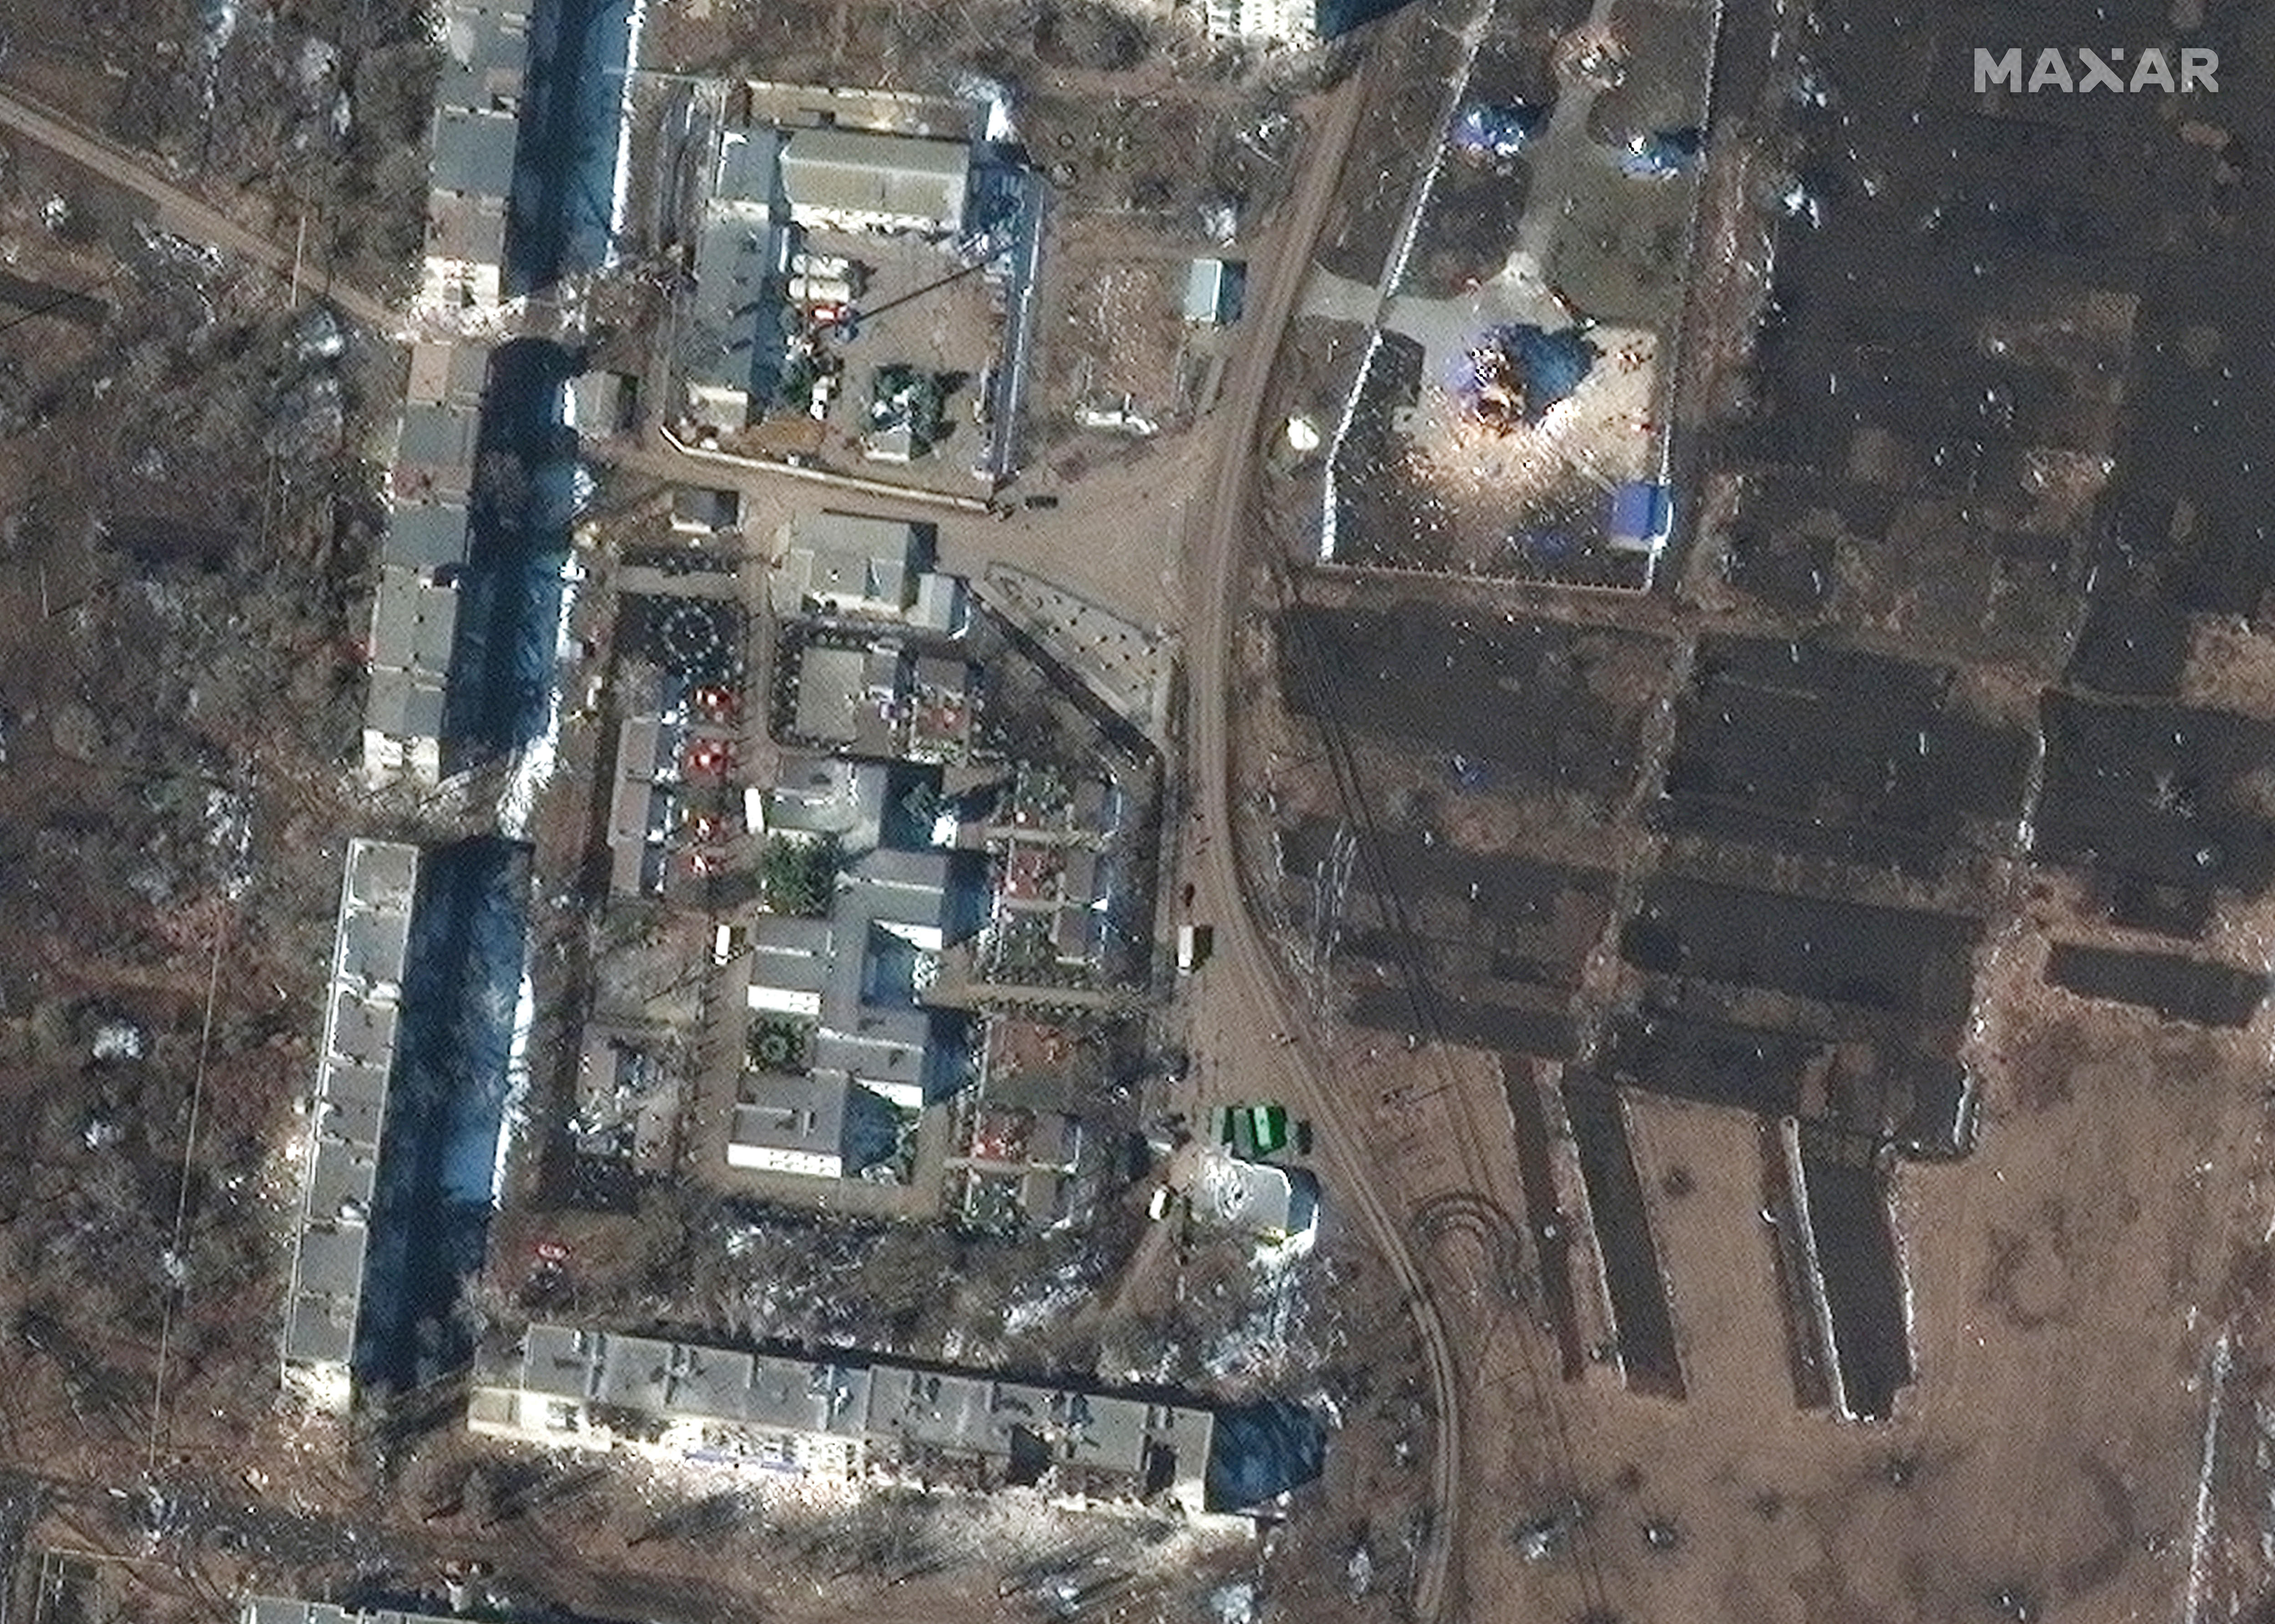 Satellite image of destroyed apartment complex and church.